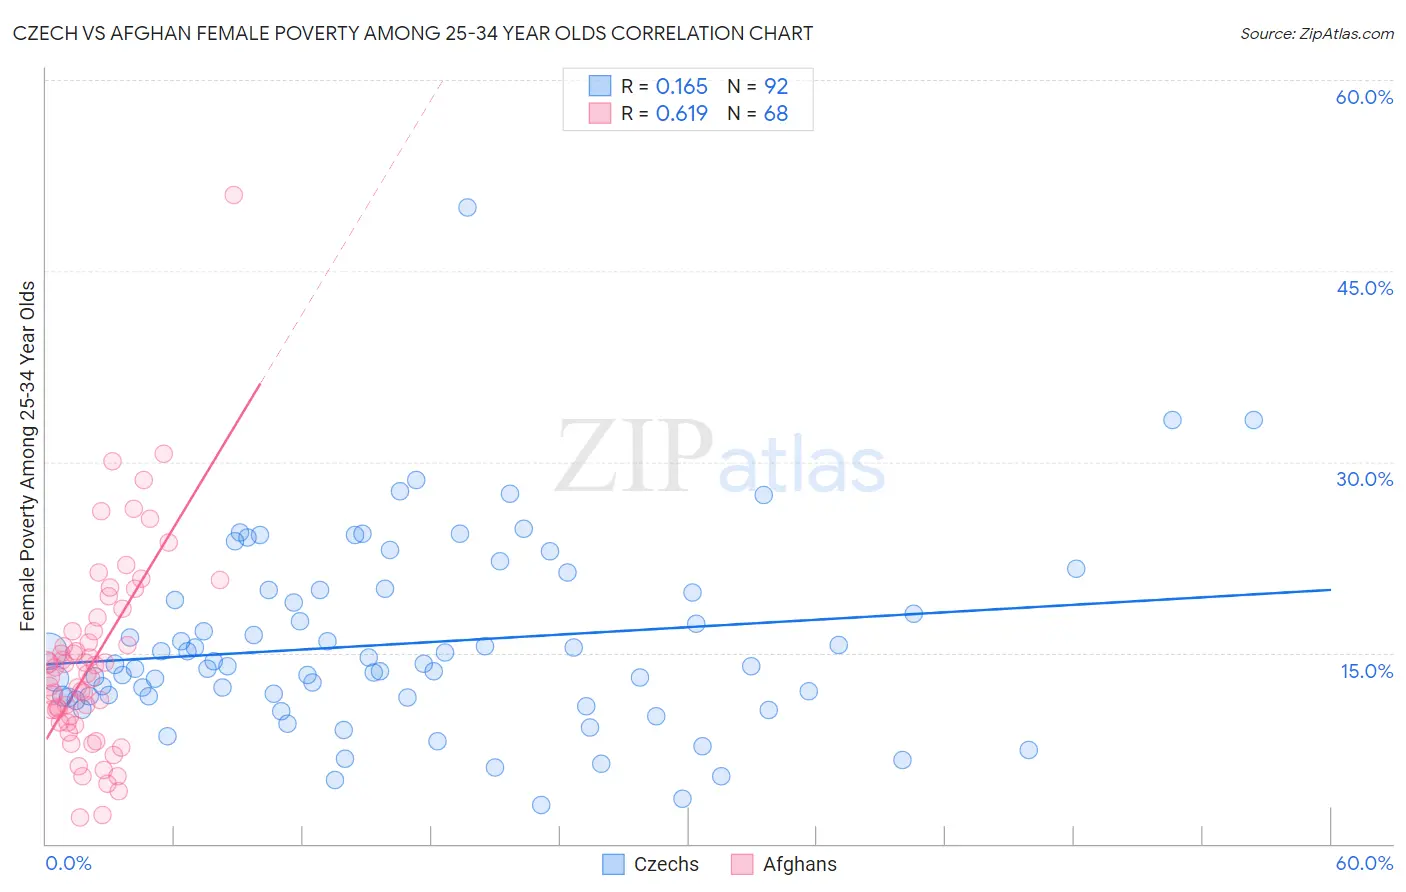 Czech vs Afghan Female Poverty Among 25-34 Year Olds